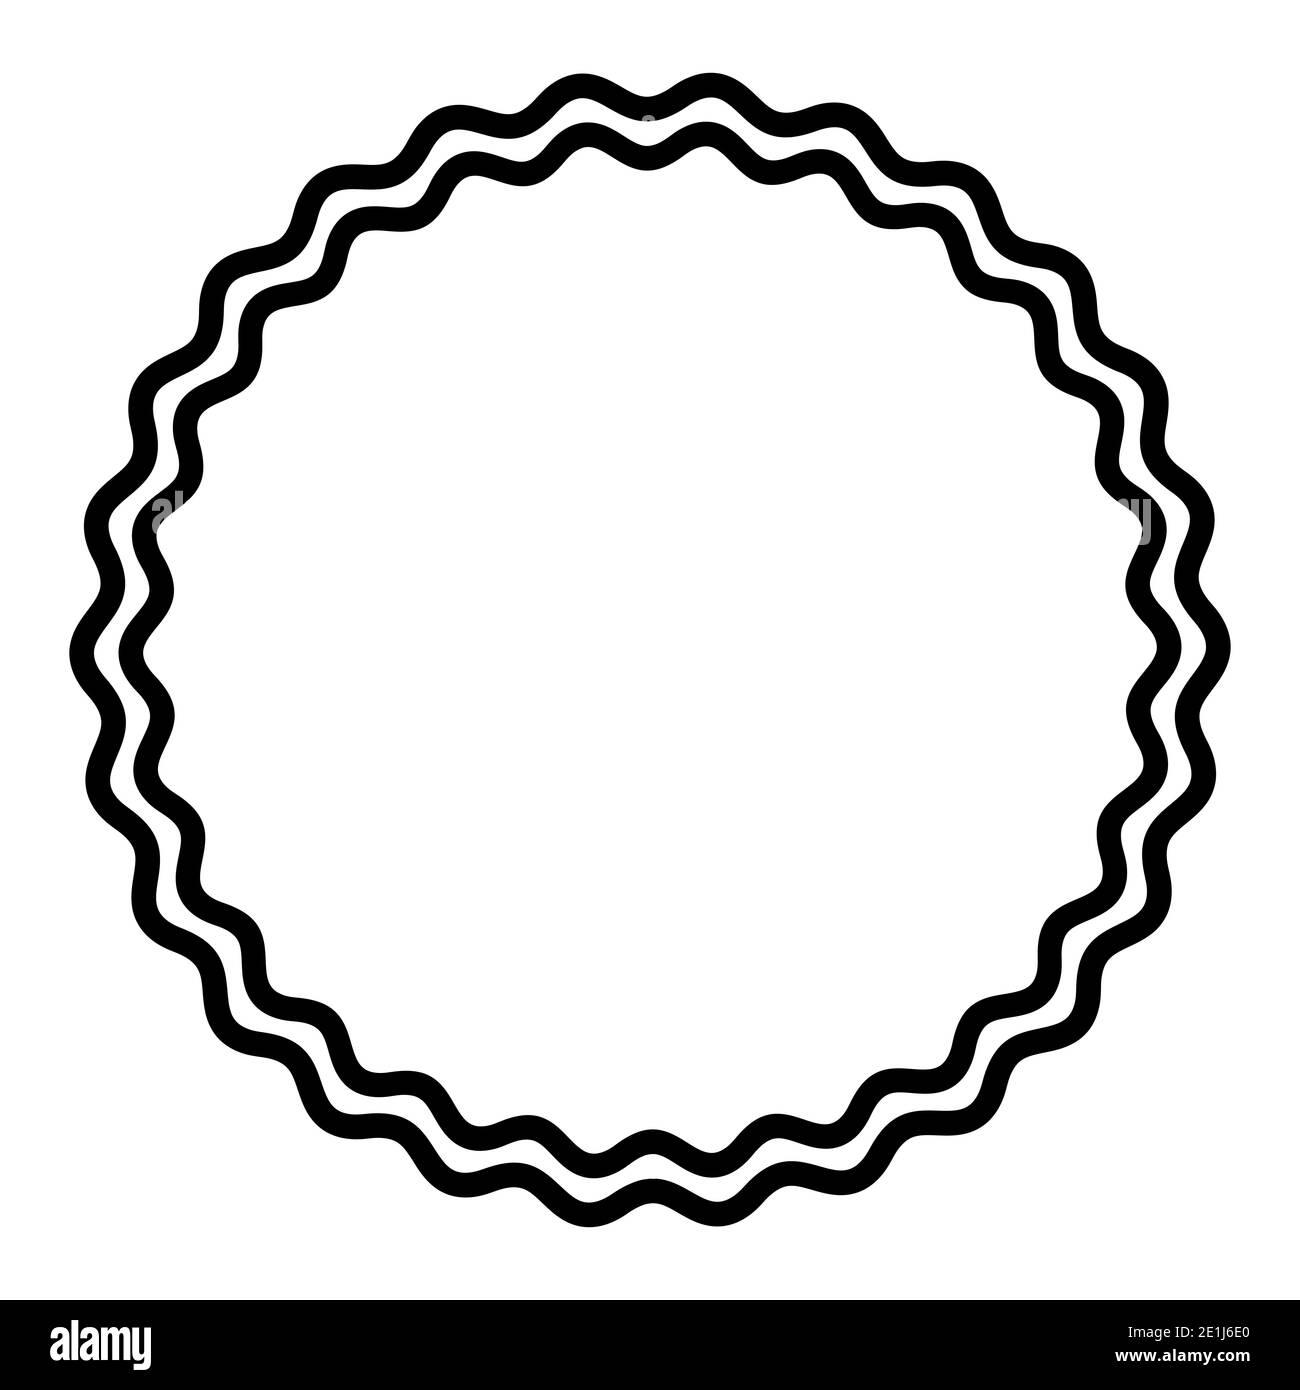 Two bold wavy lines forming a black circle frame. Circle frame, made by two black serpentine lines. Snake-like circular frame, a decorative surround. Stock Photo